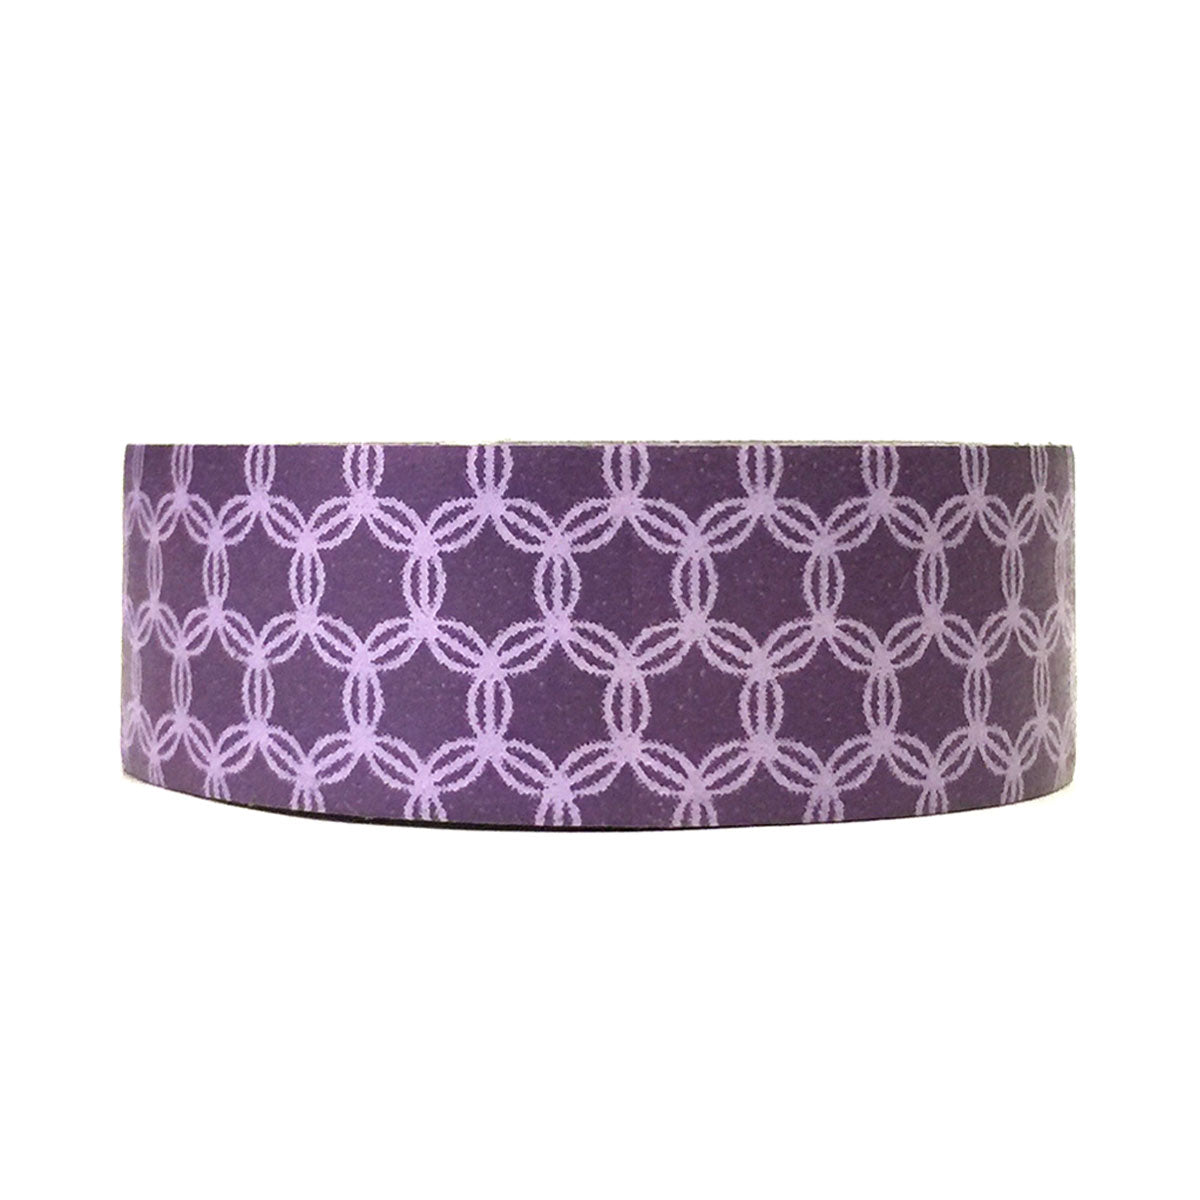 Lavendula Striped Sheer Ribbon with Opaque Borders - 1.5